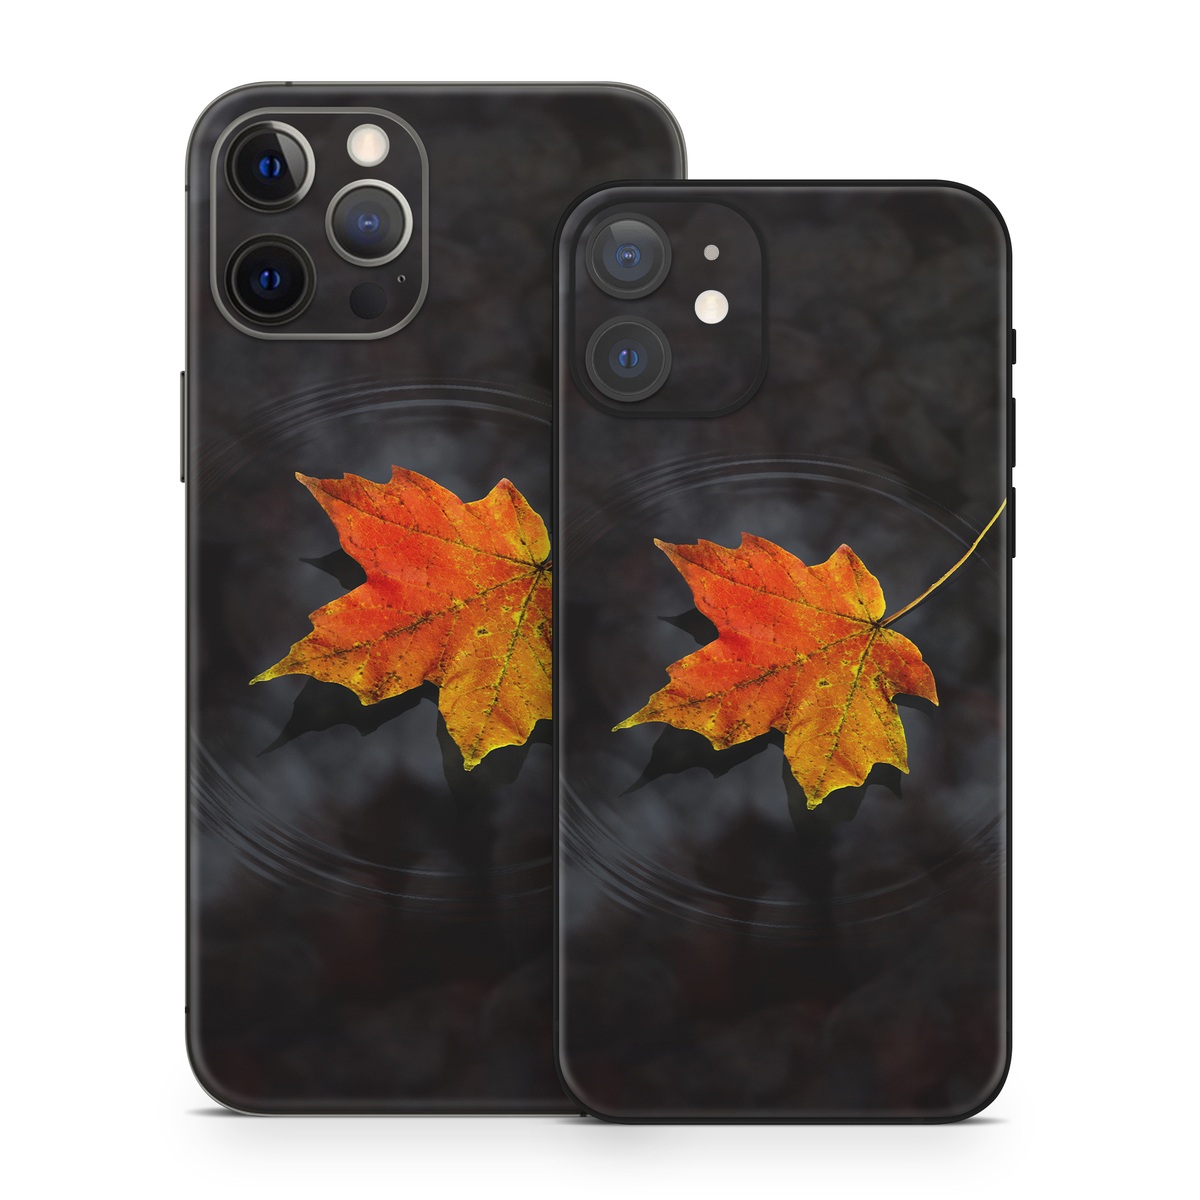 iPhone 12 Skin design of Leaf, Maple leaf, Tree, Black maple, Sky, Yellow, Deciduous, Orange, Autumn, Red with black, red, green colors